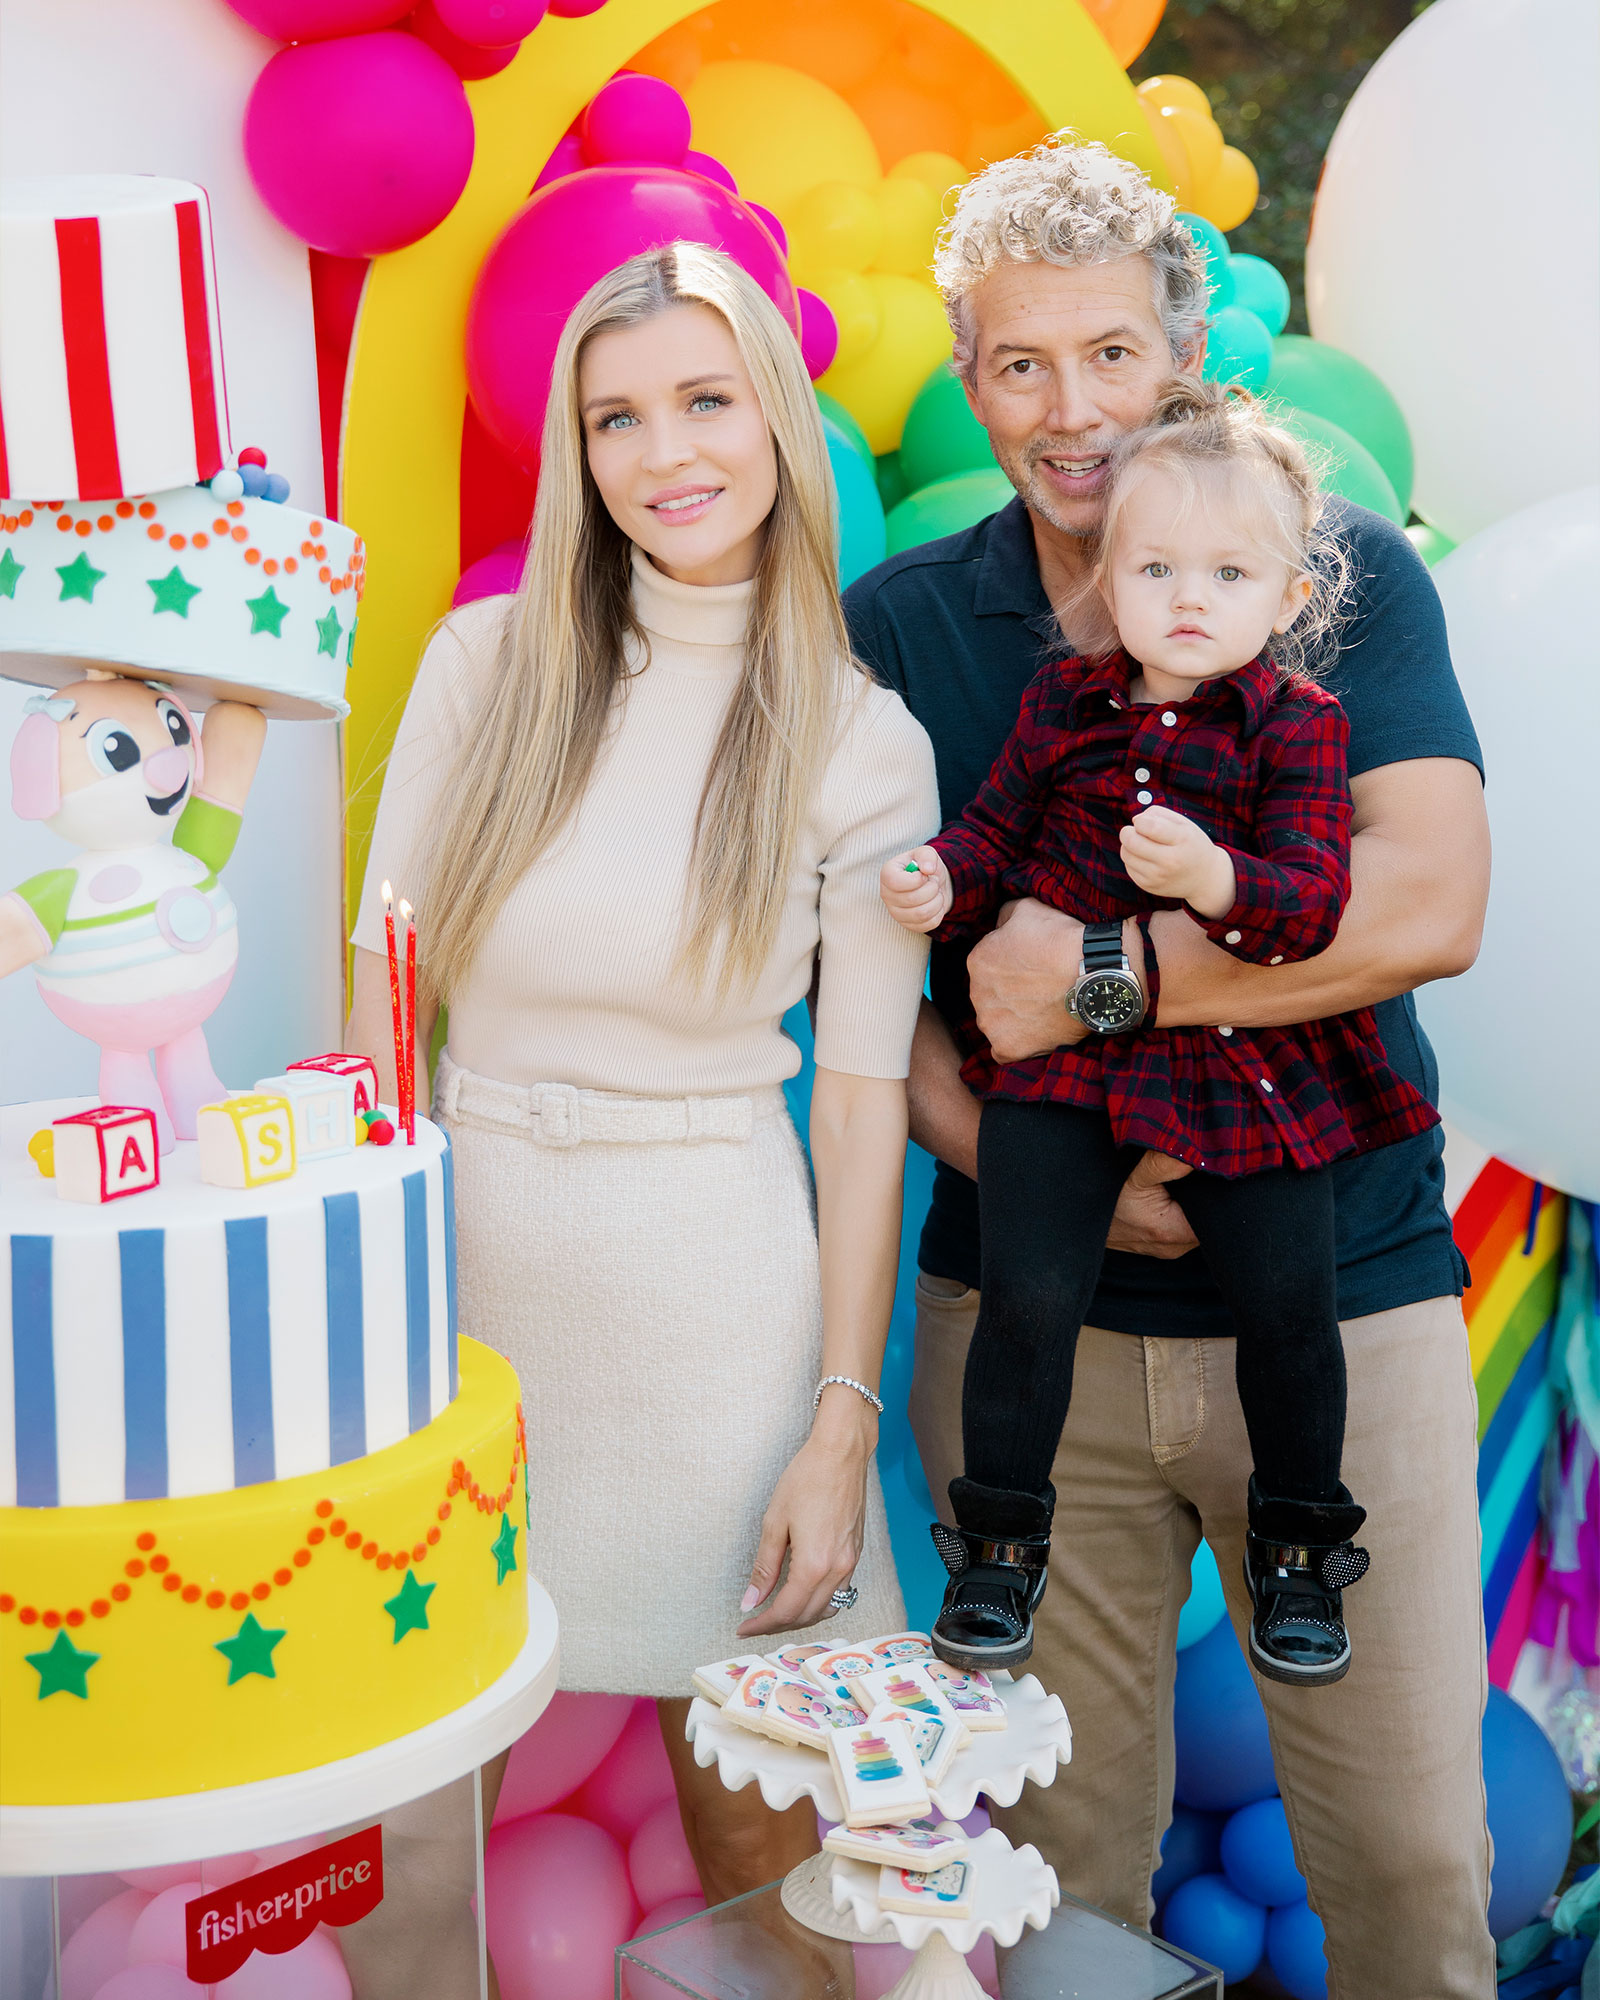 Joanna Krupa Celebrates Daughter Asha’s 2nd Birthday With Fisher Price-Themed Party: Photos